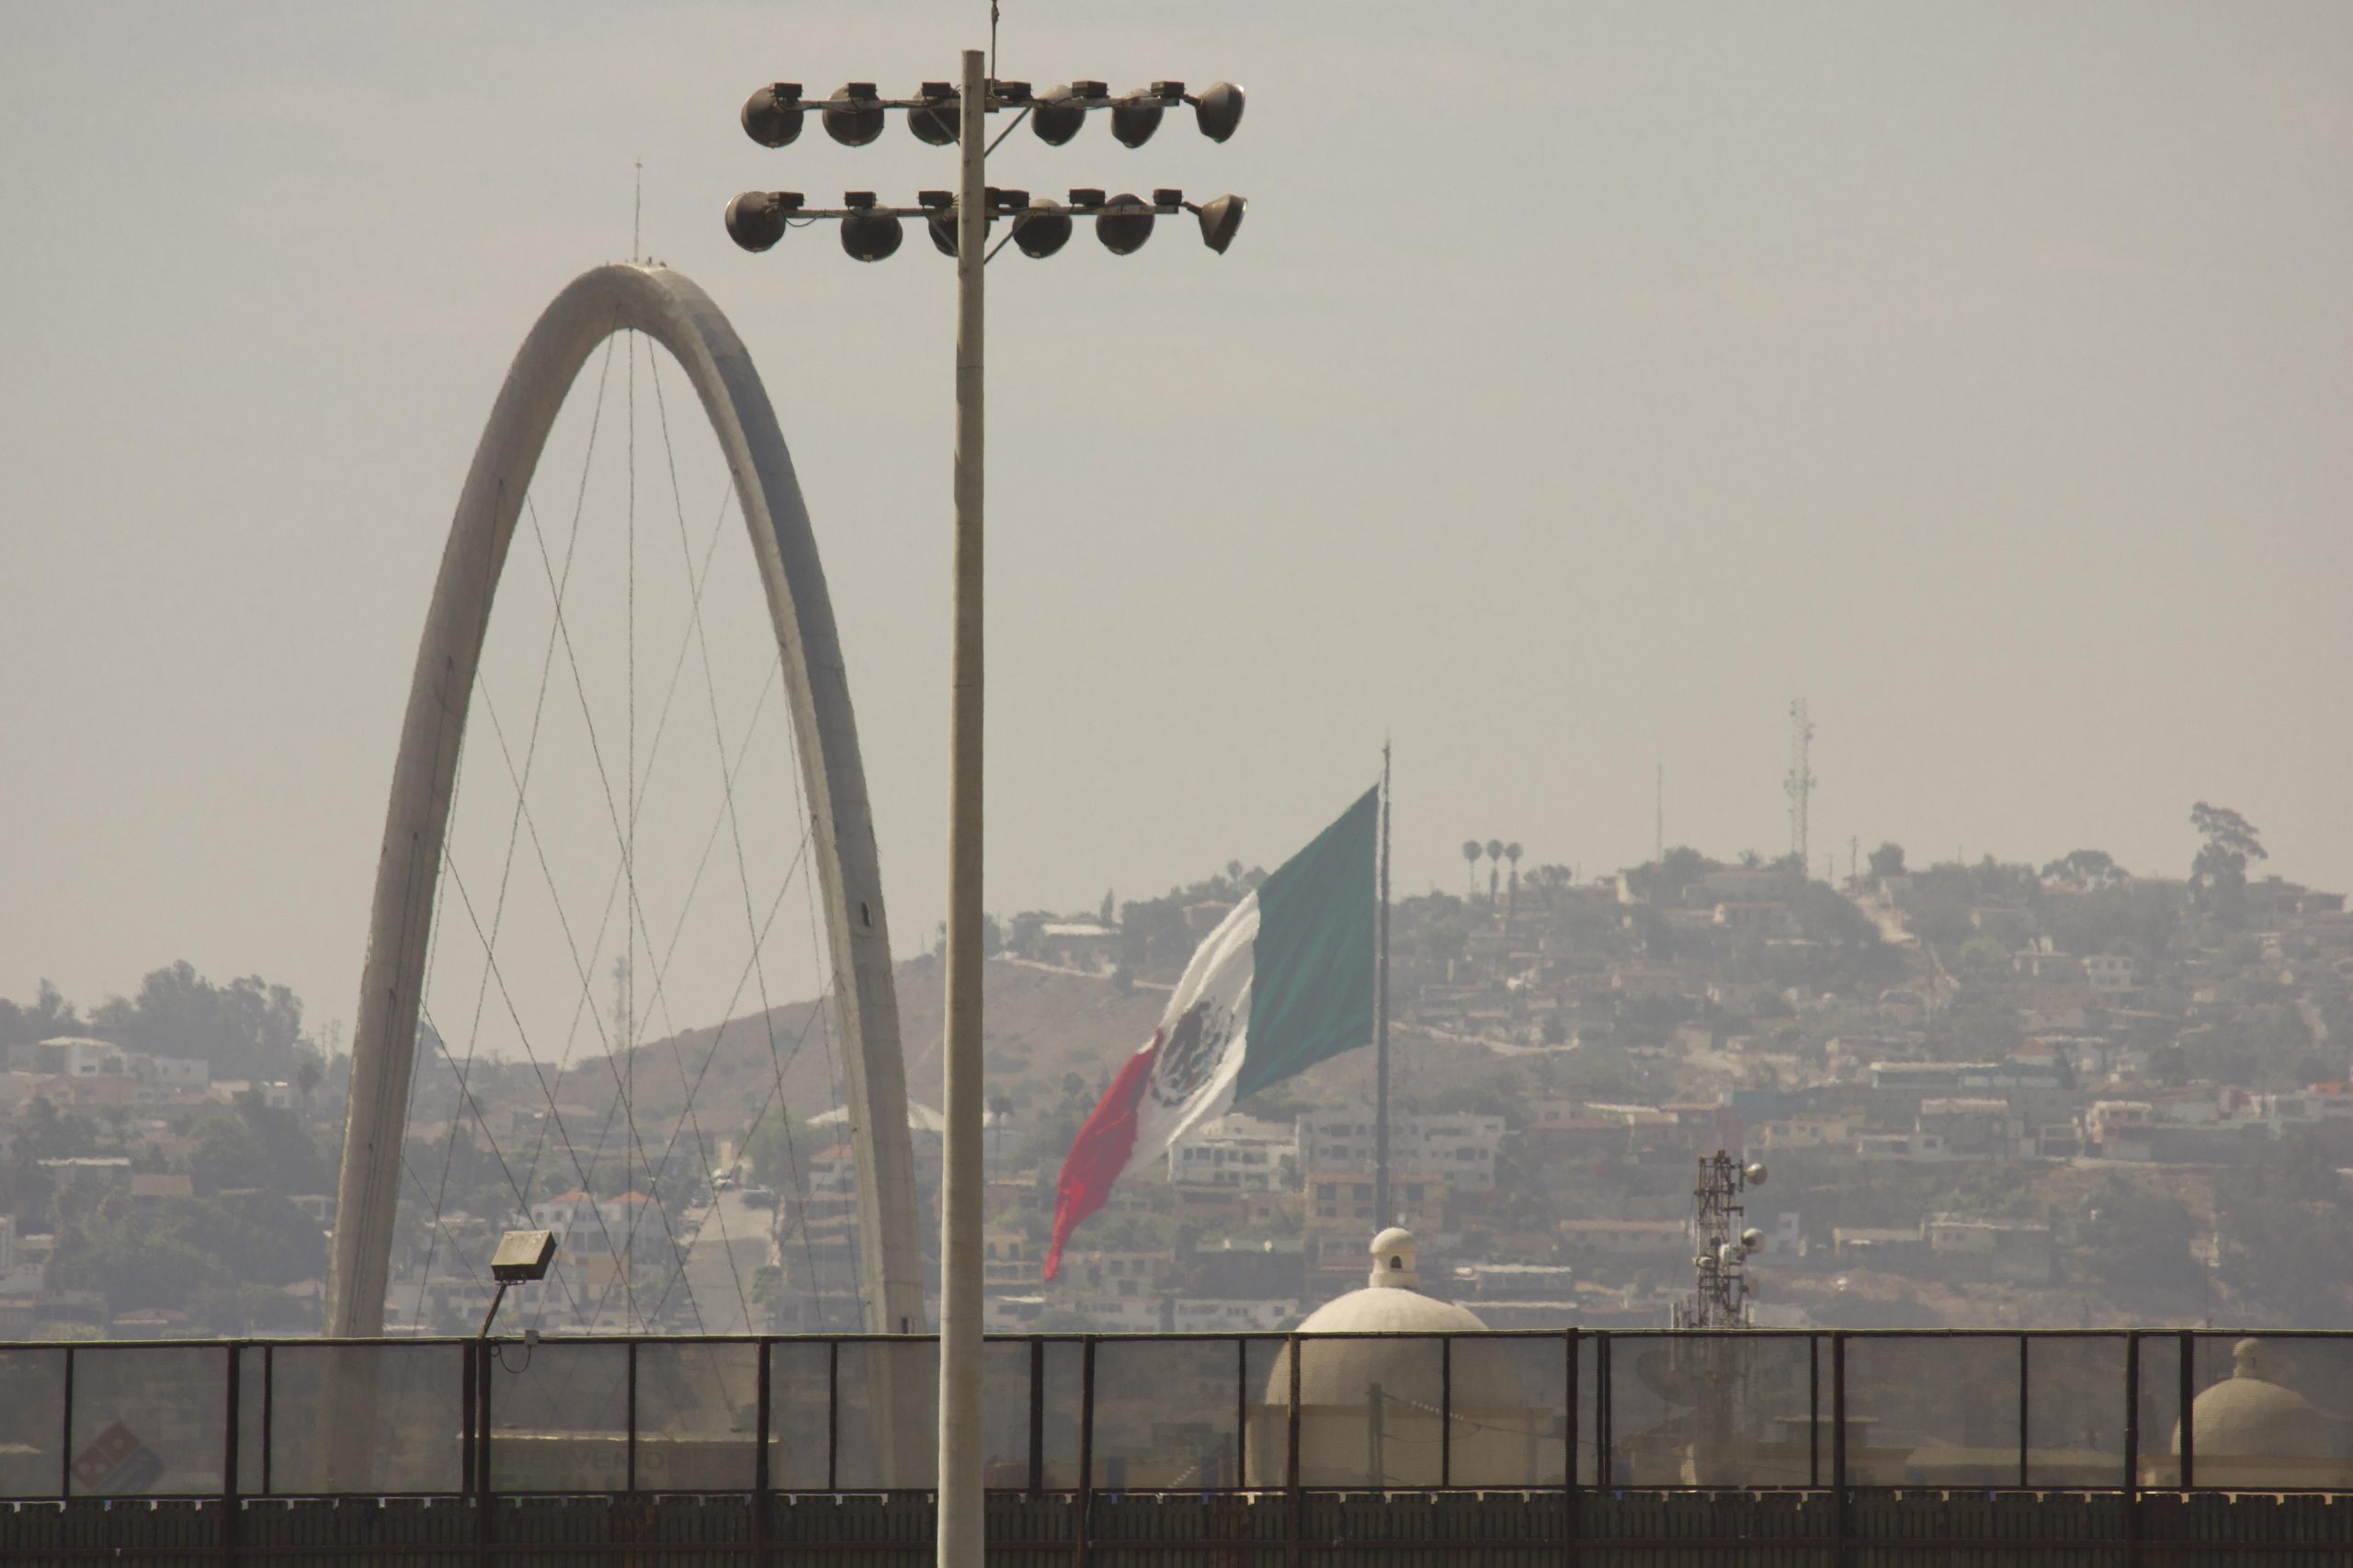 Boundary line between United States and Mexico, from San Diego looking at Tijuana Revolucion Arch